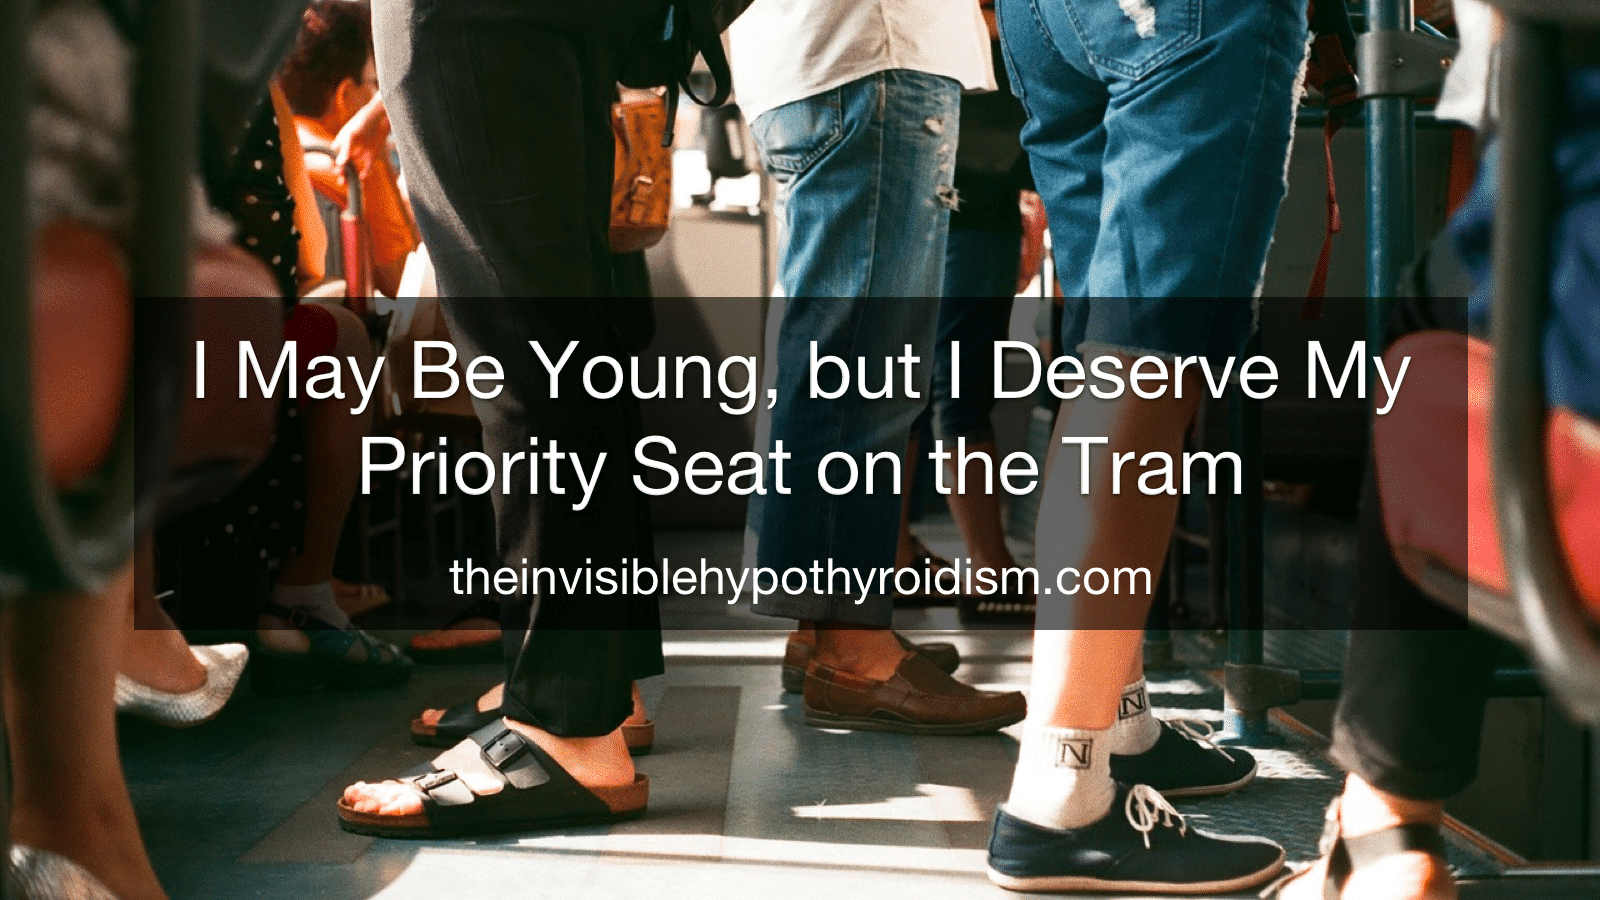 I May Be Young, but I Deserve My Priority Seat on the Tram